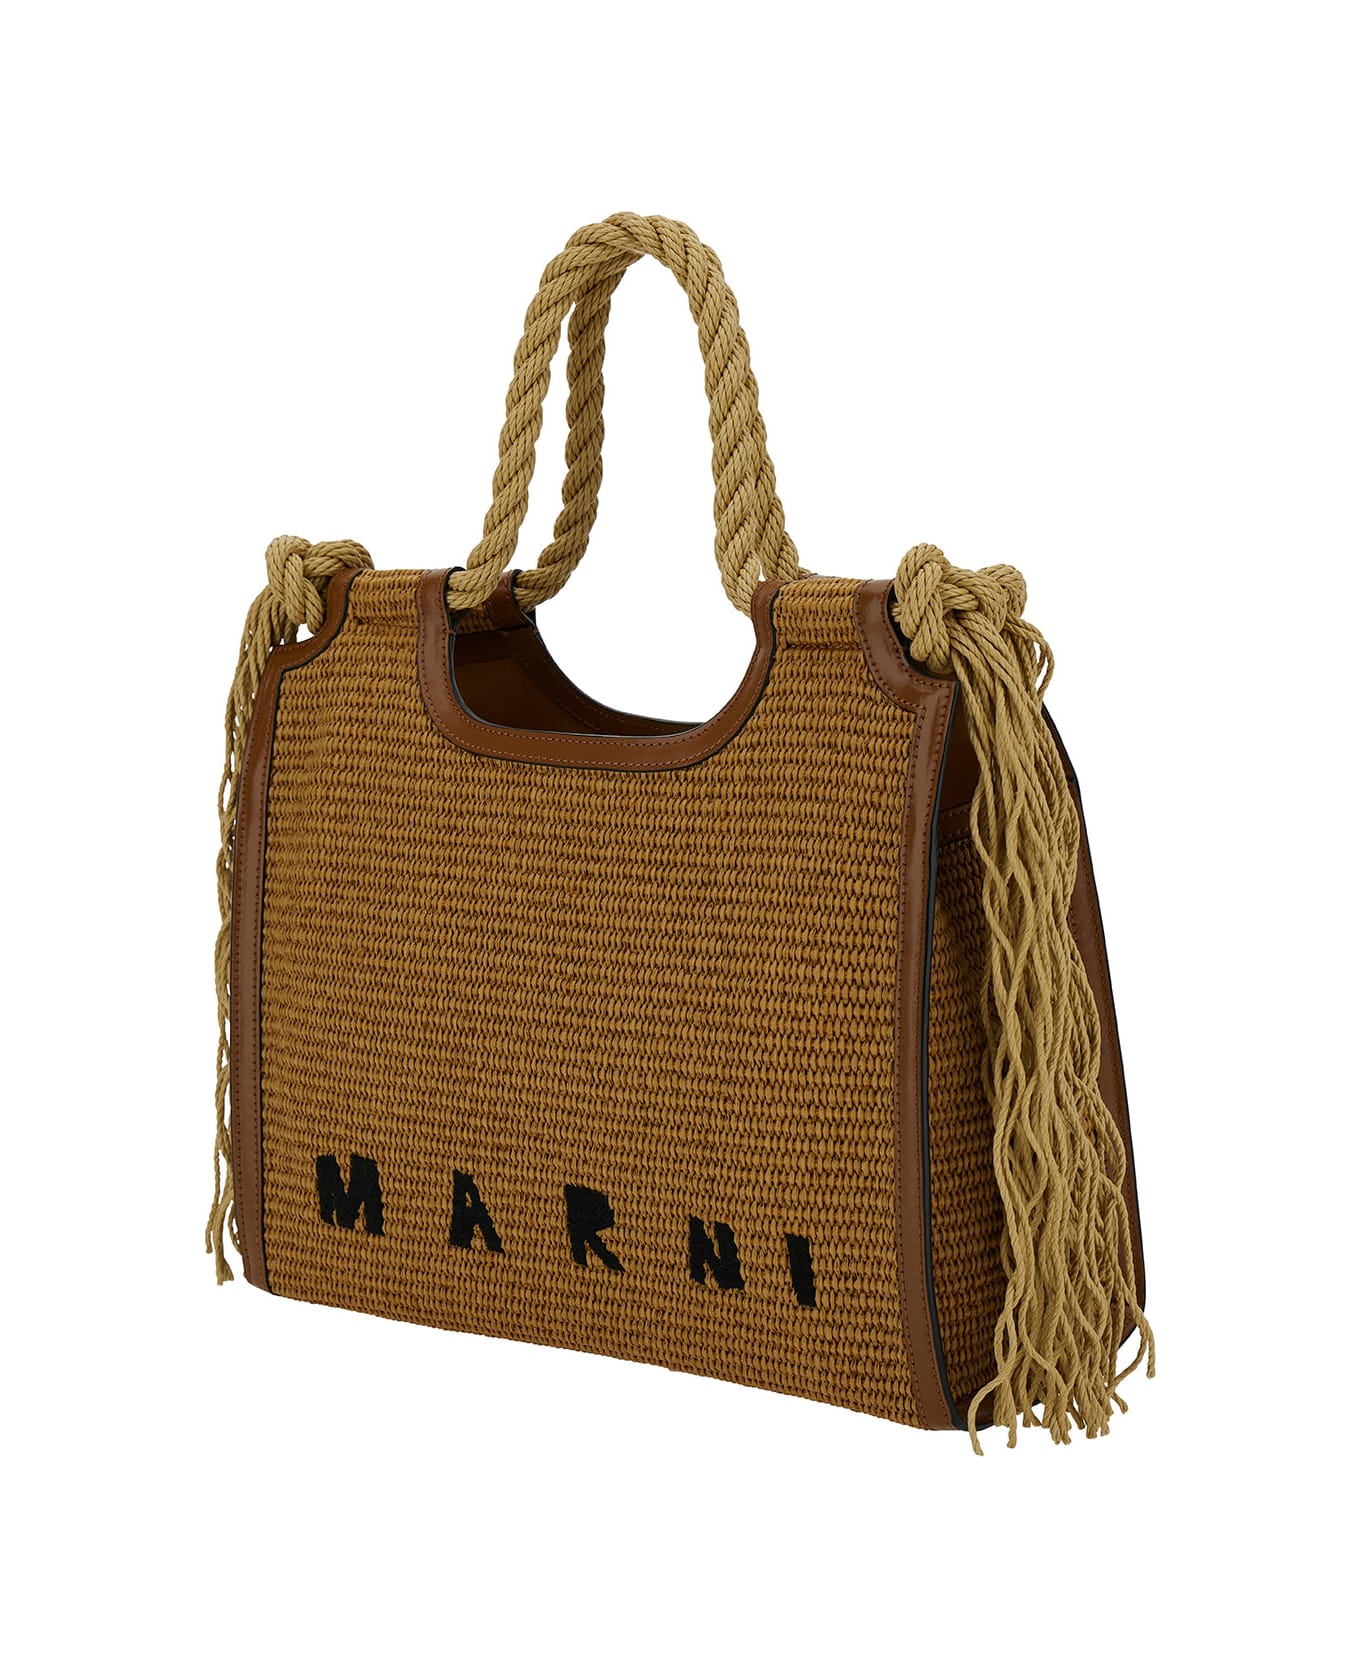 Marni 'summer' Beige Tote Bag With Cord Handles And Logo Detail In Rafia Woman - Beige